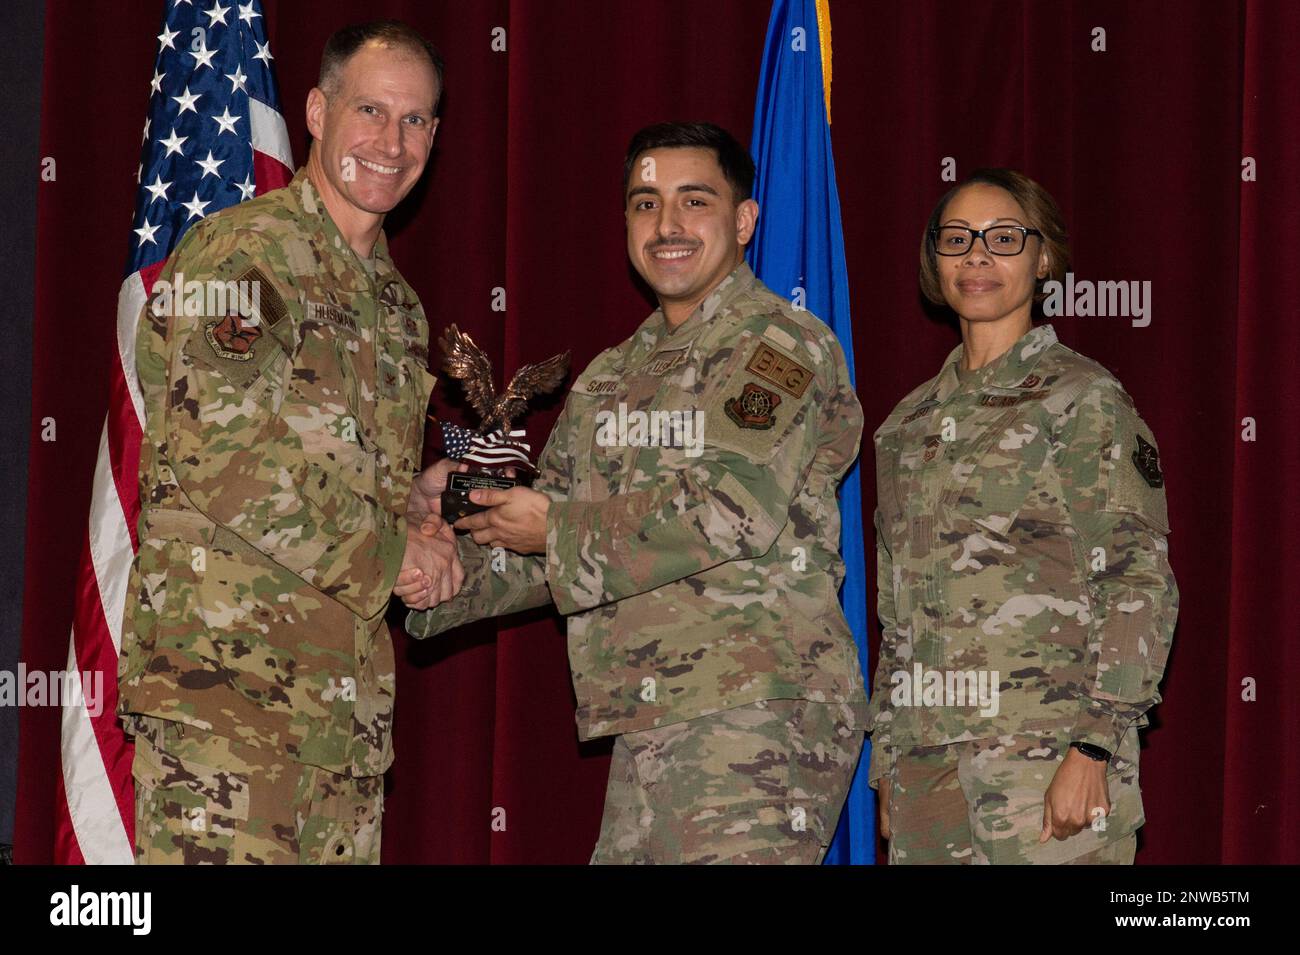 Col. Matt Husemann, left, 436th Airlift Wing commander and Chief Master Sgt. Tiffany Griego, right, 436th Mission Support Group senior enlisted leader, present Airman 1st Class Candido Santos, center, 436th Logistics Readiness Squadron, with a trophy during the 436th AW 4th Quarter Awards ceremony held at the Base Theater on Dover Air Force Base, Delaware, Jan. 26, 2023. Santos was recognized as the wing’s Honor Guard Member of the Quarter. Stock Photo